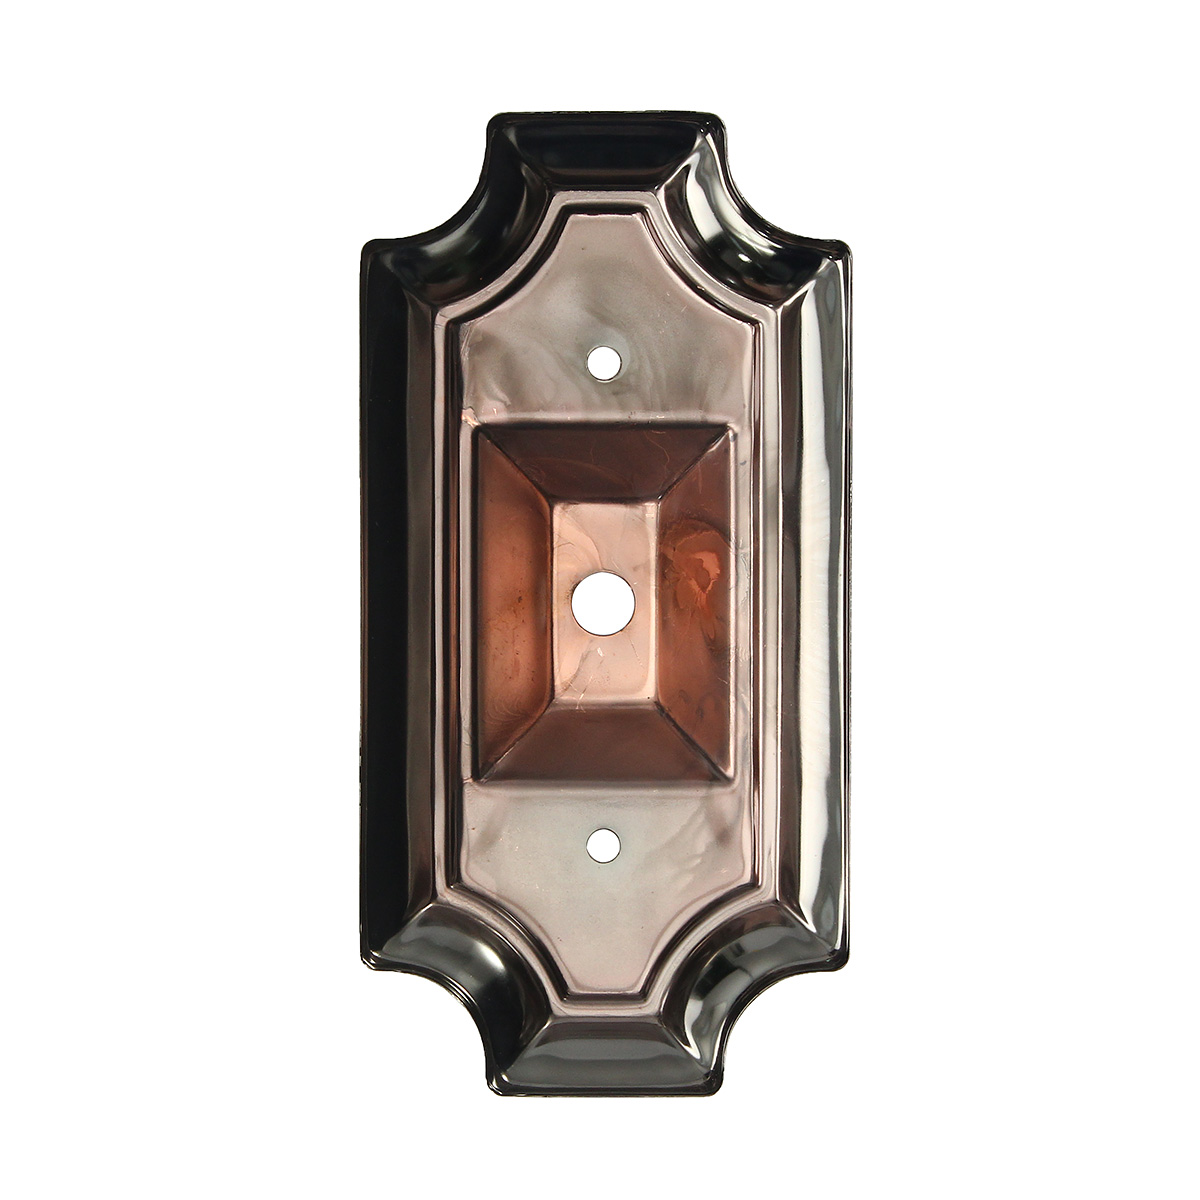 Retro-Vintage-Rectangle-Style-Sconce-Wall-Lamp-Light-Base-Part-Replacement-Mount-Fixture-1112739-4